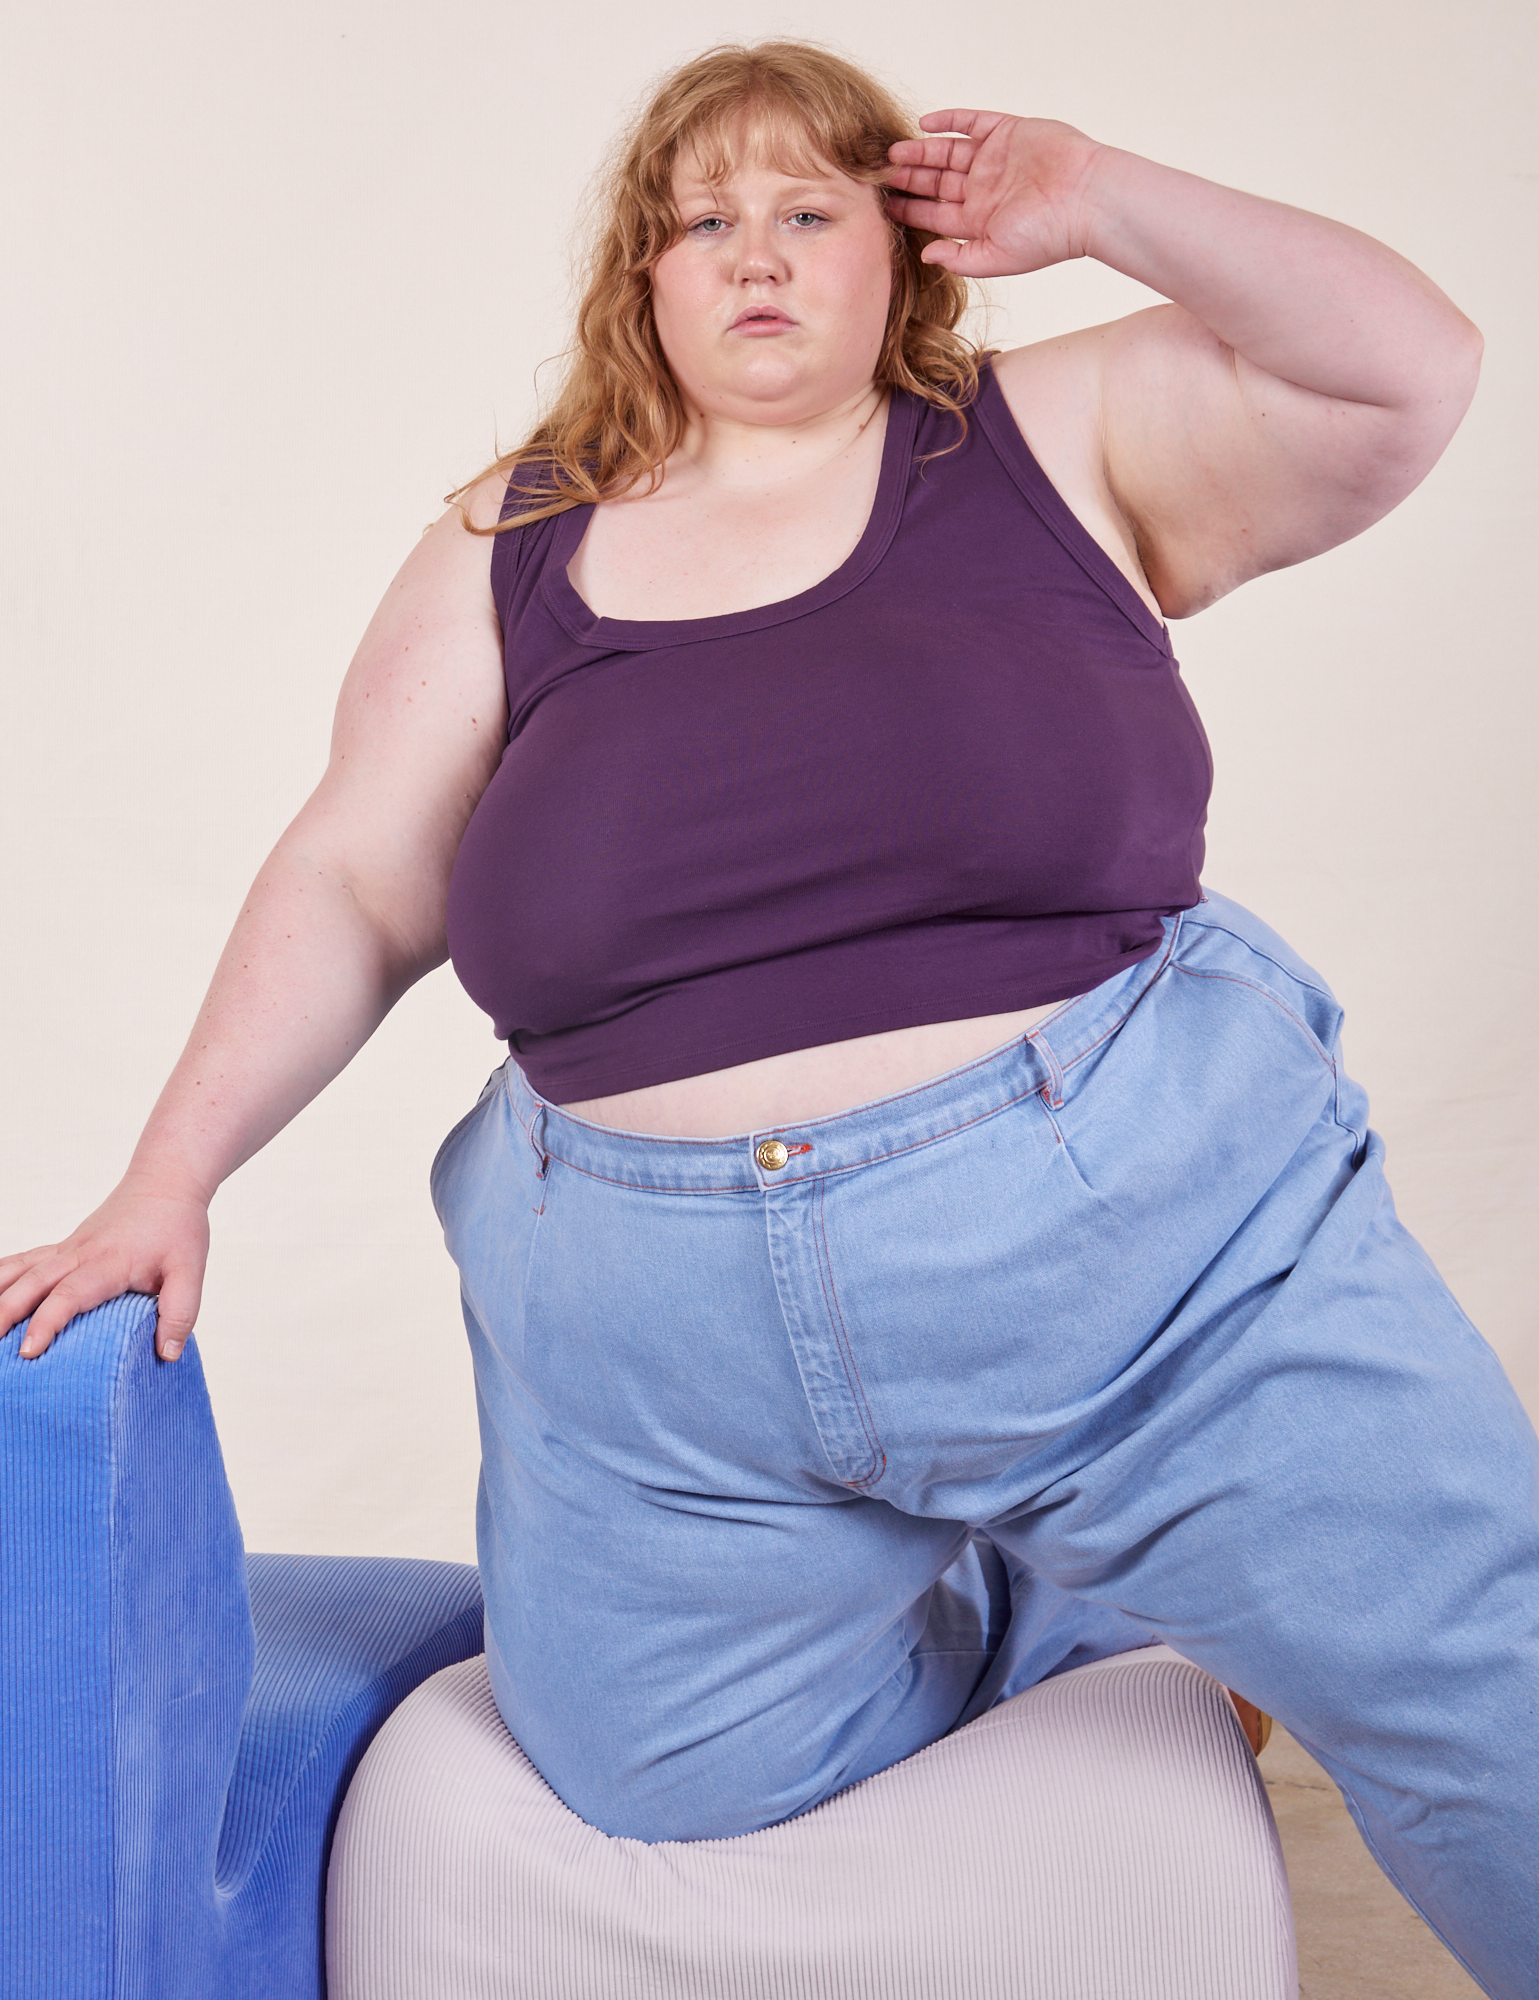 Catie is wearing Cropped Tank Top in Nebula Purple and light wash Denim Trousers